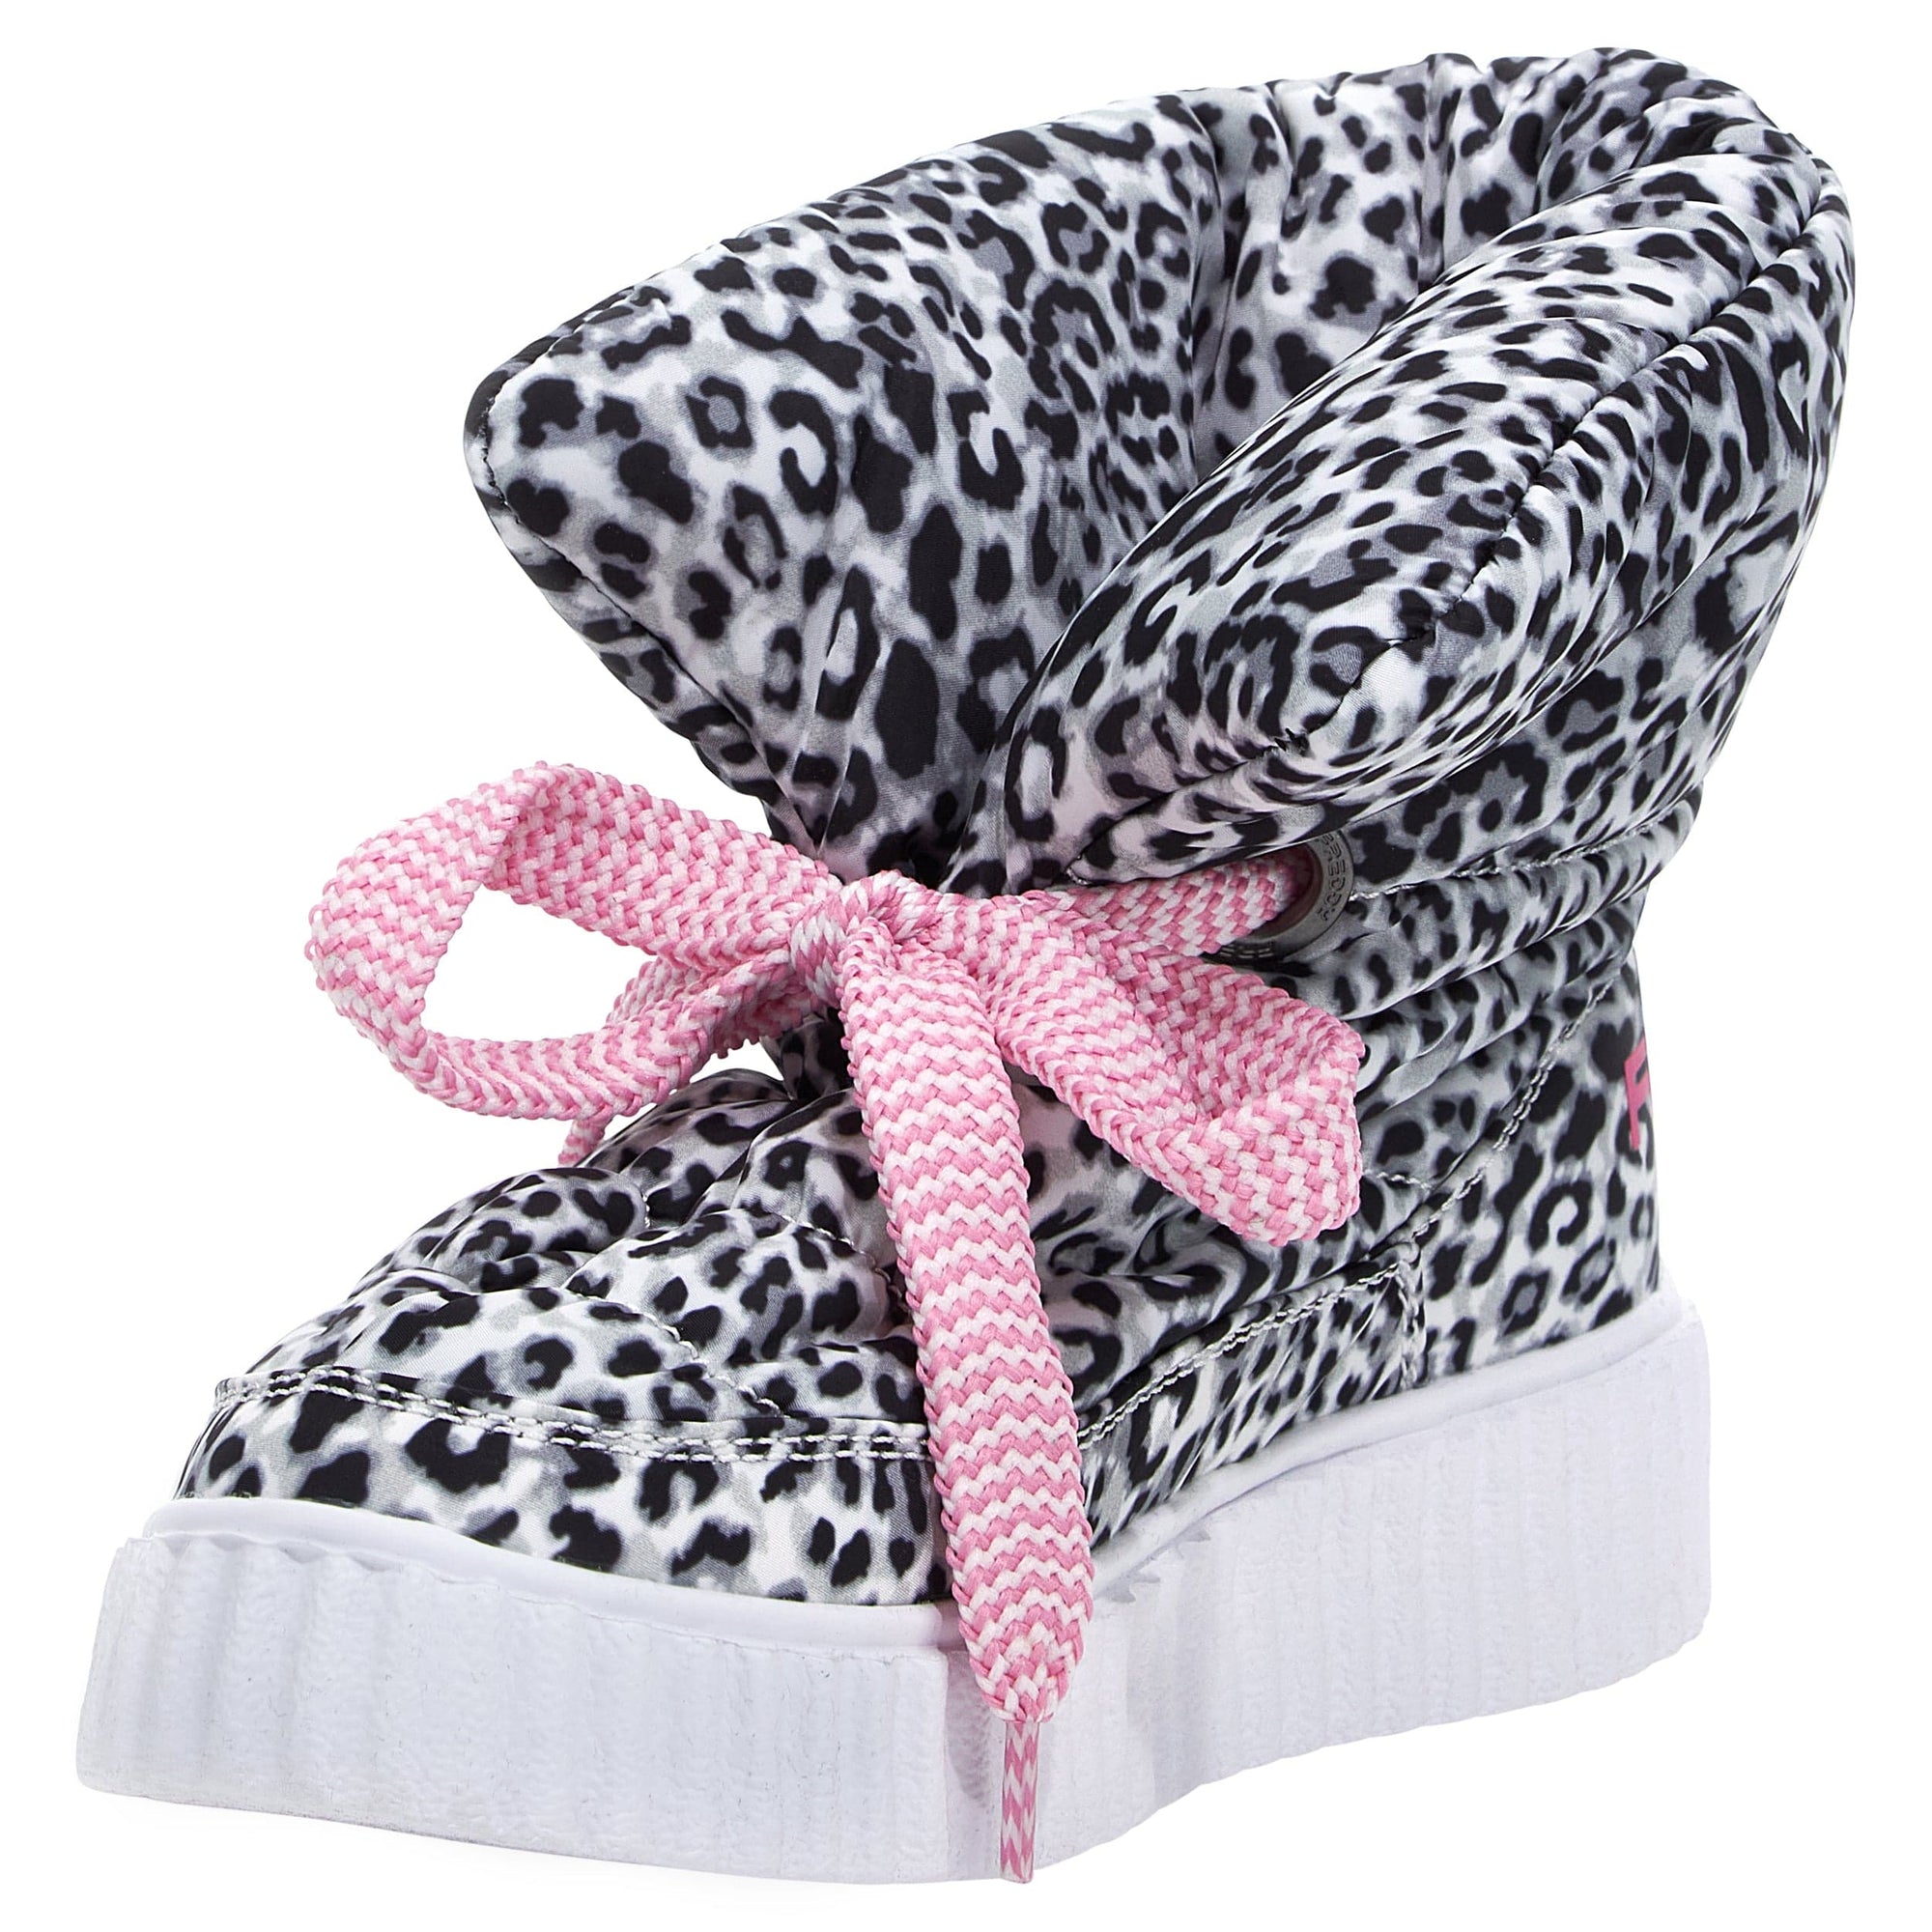 Puff Boots with Fleece Lining - Black + White Leopard 1